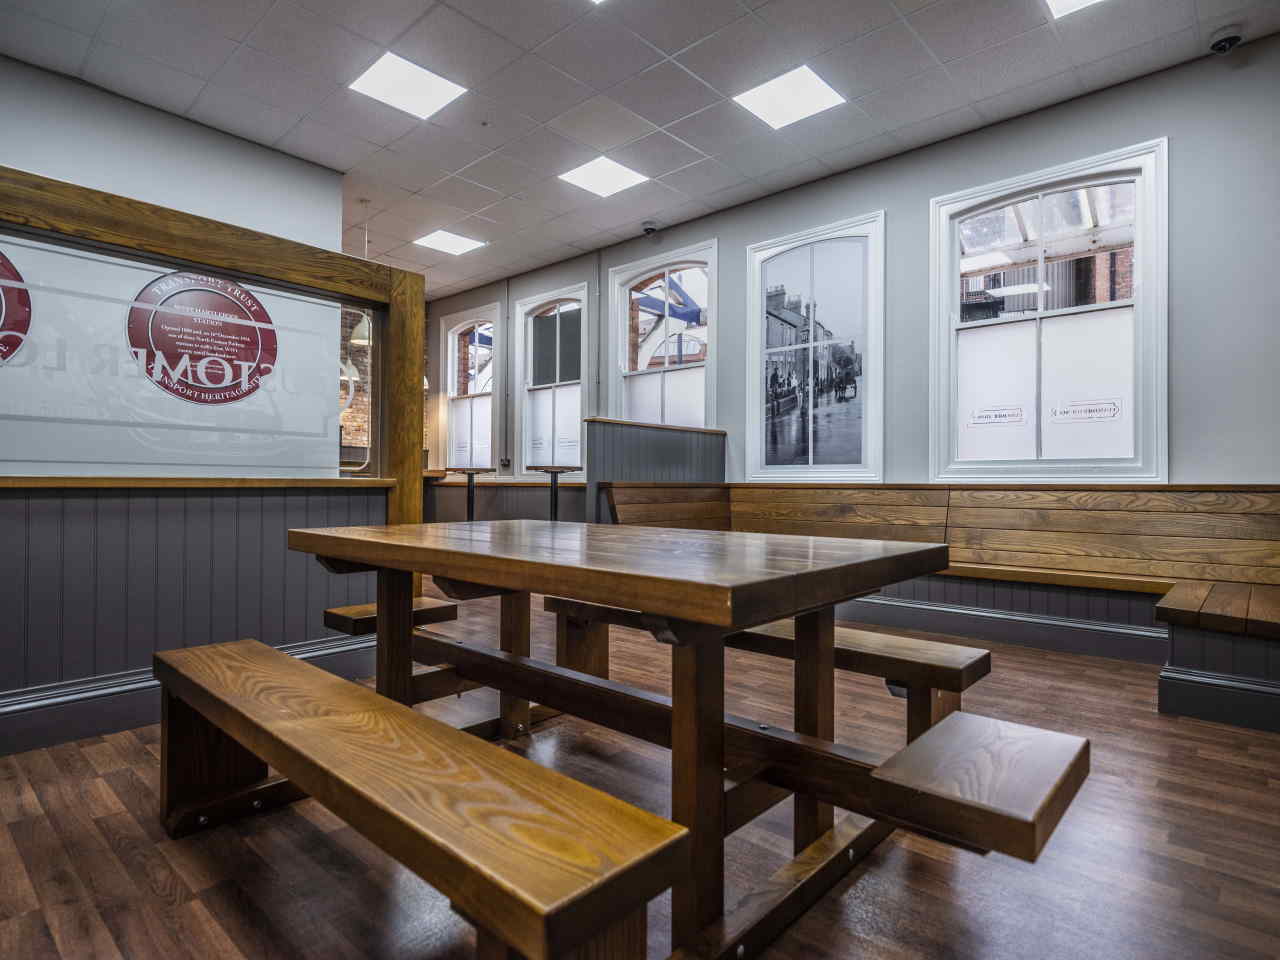 New Grand Central customer lounge at Hartlepool station